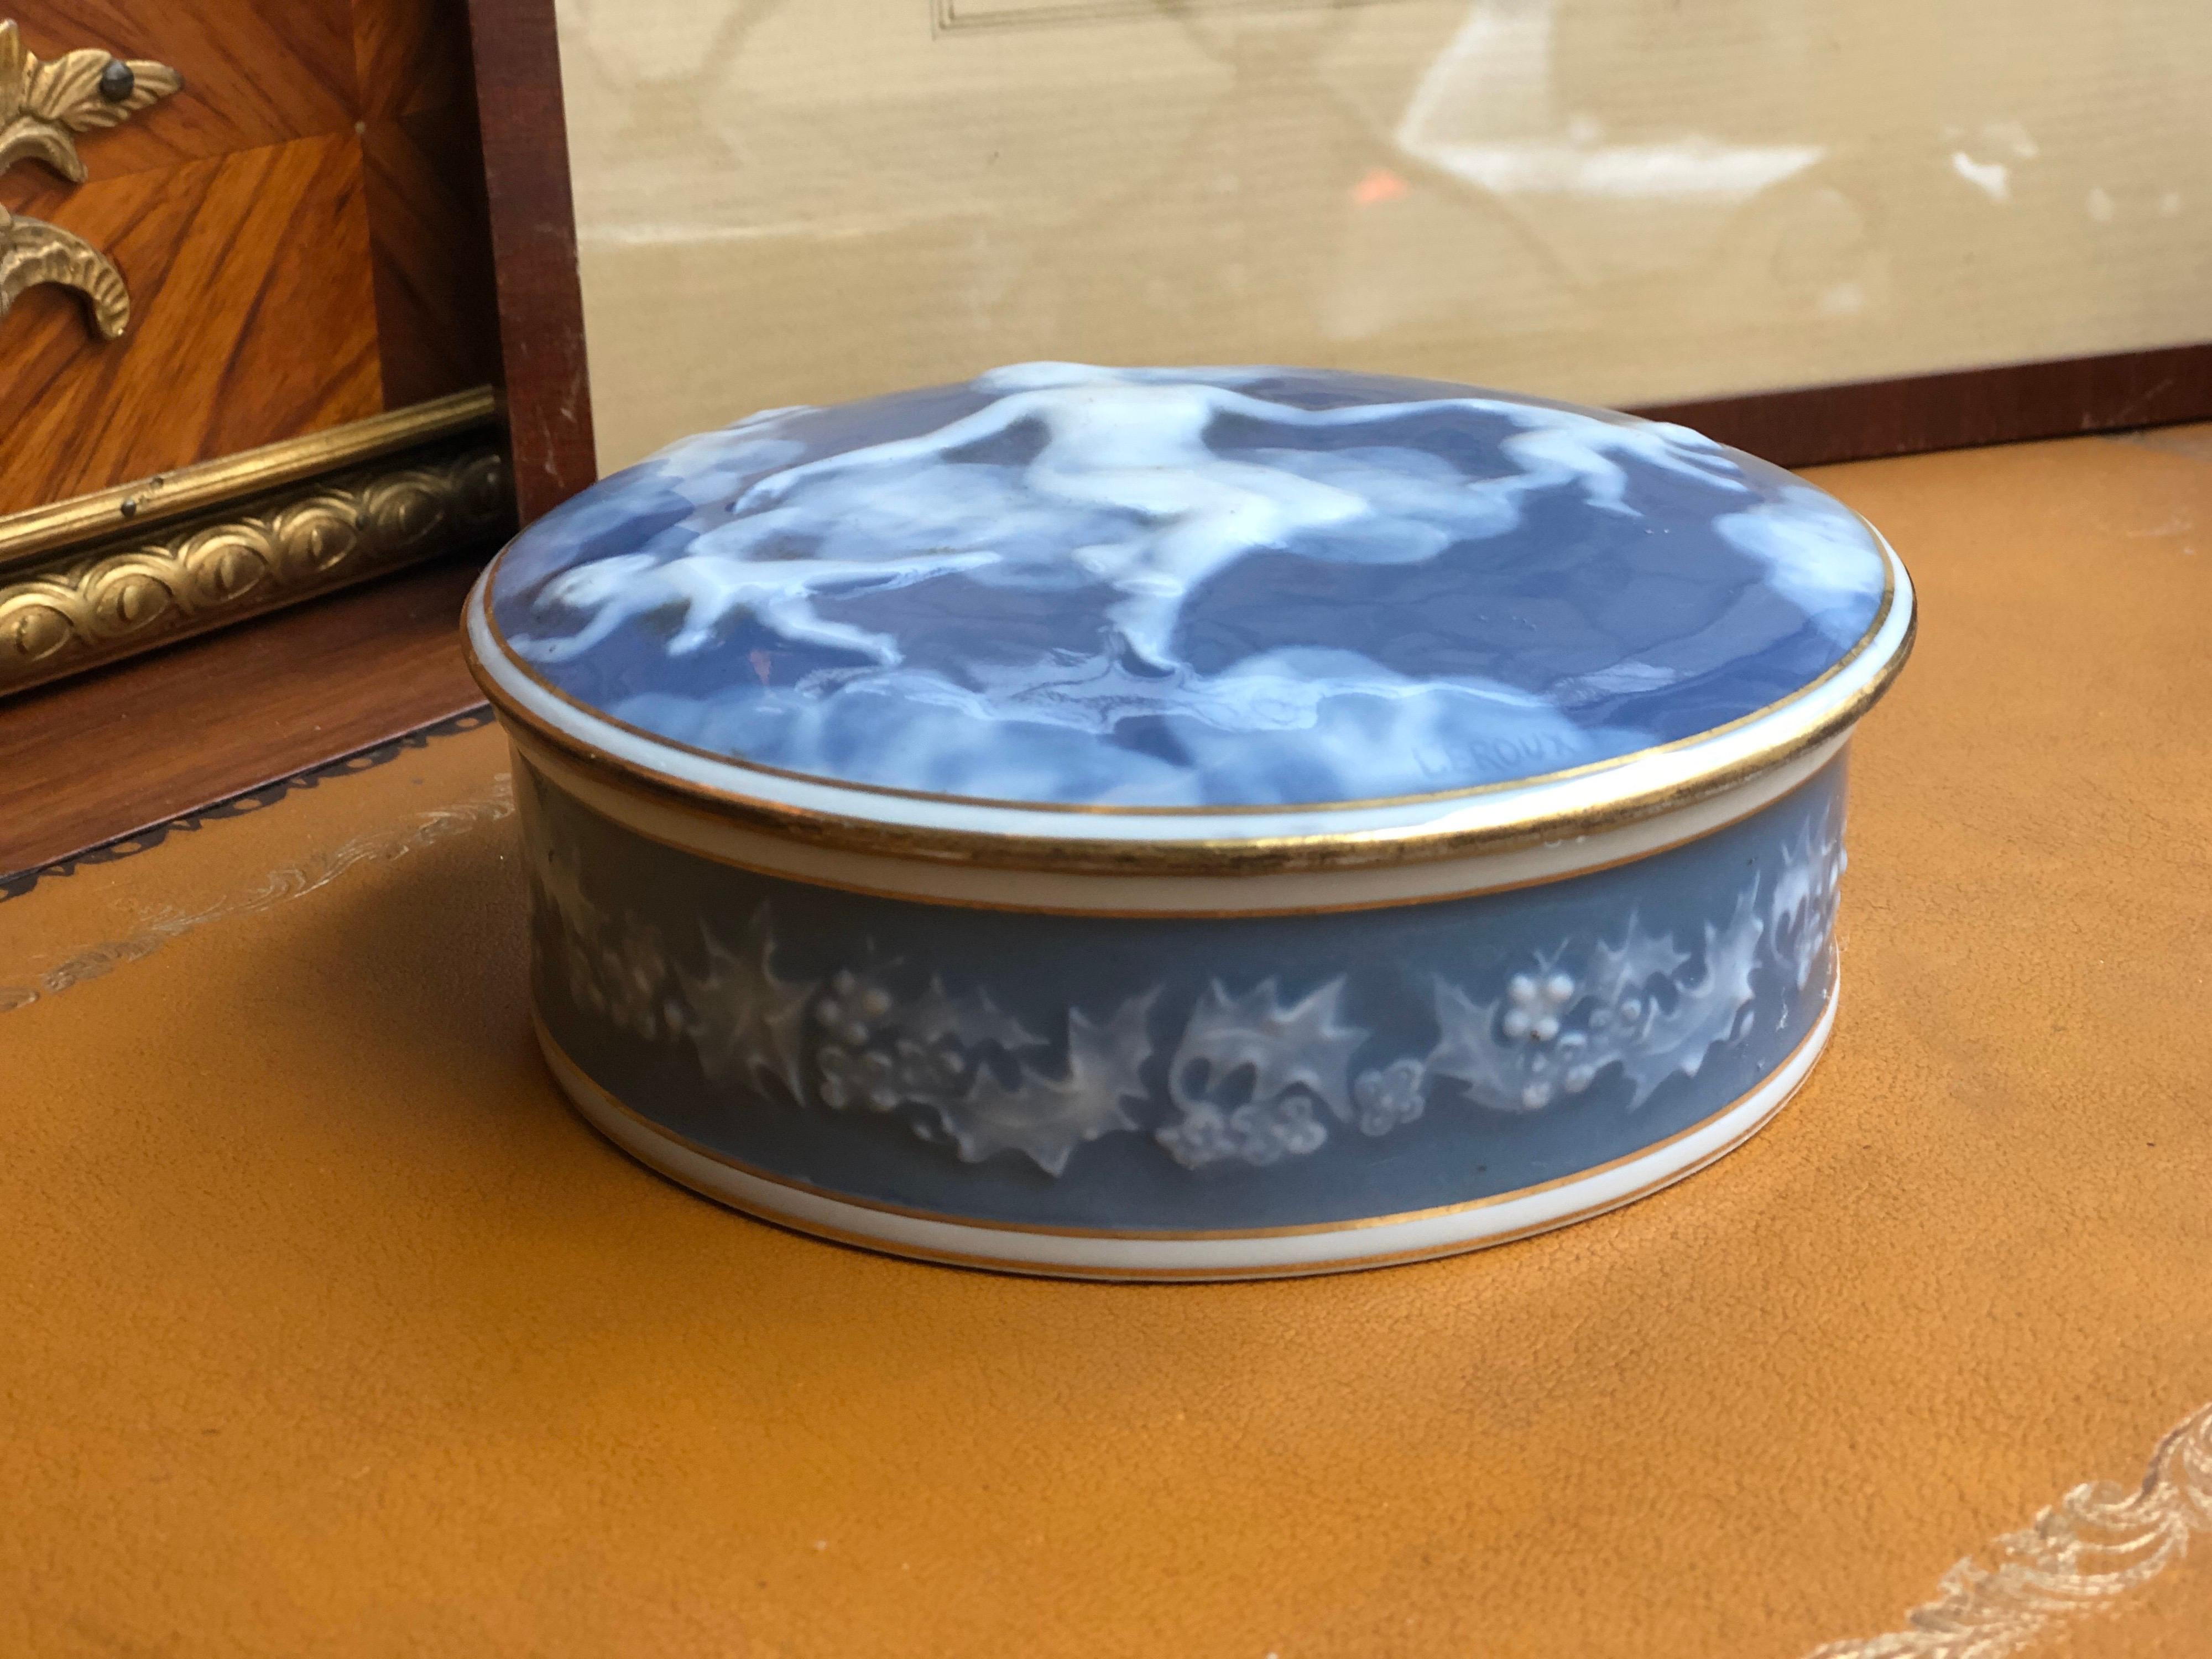 An elegant round chocolate box made in Fine blue porcelain with figures of a Goddess and two angels hiding by the clouds. Floral decoration from the side in blue and white again. Very good condition, signed on the top 